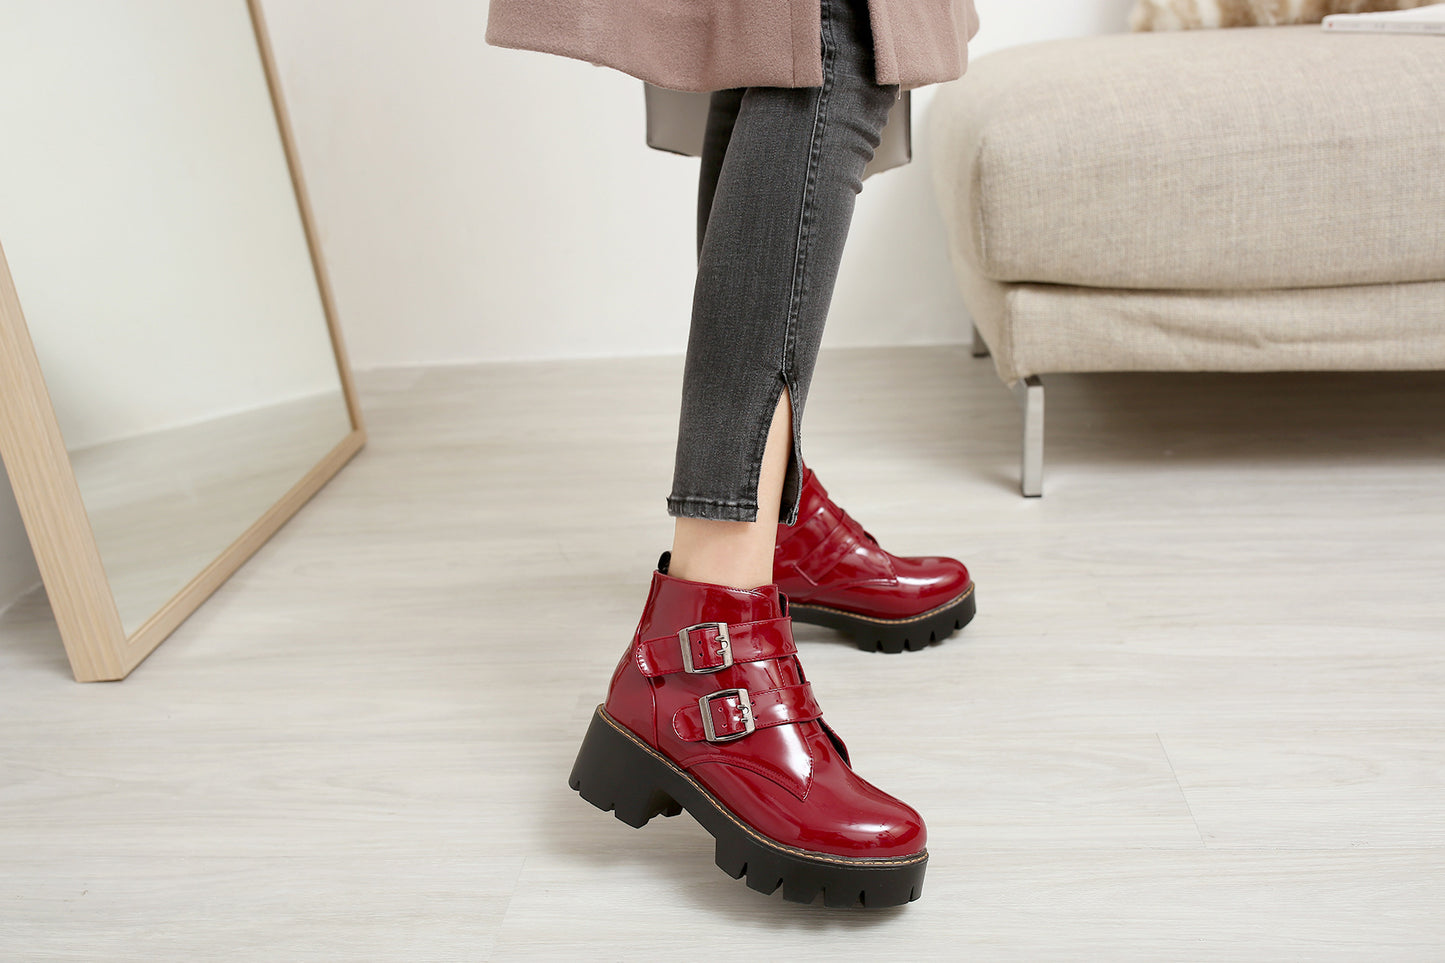 Autumn and Winter Patent Leather Short Boots Buckle Ankle Boots Women Shoes